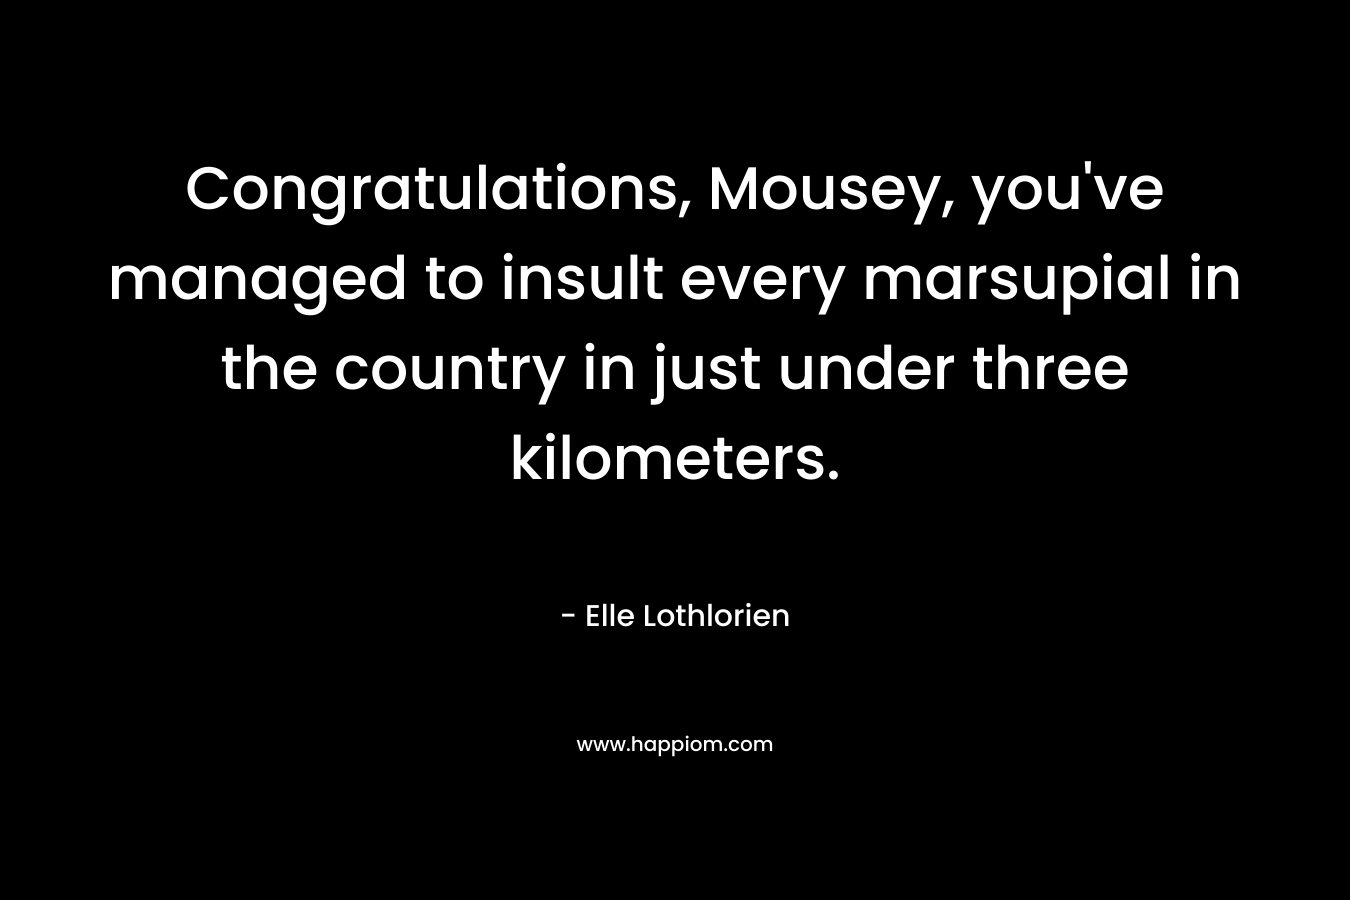 Congratulations, Mousey, you've managed to insult every marsupial in the country in just under three kilometers.